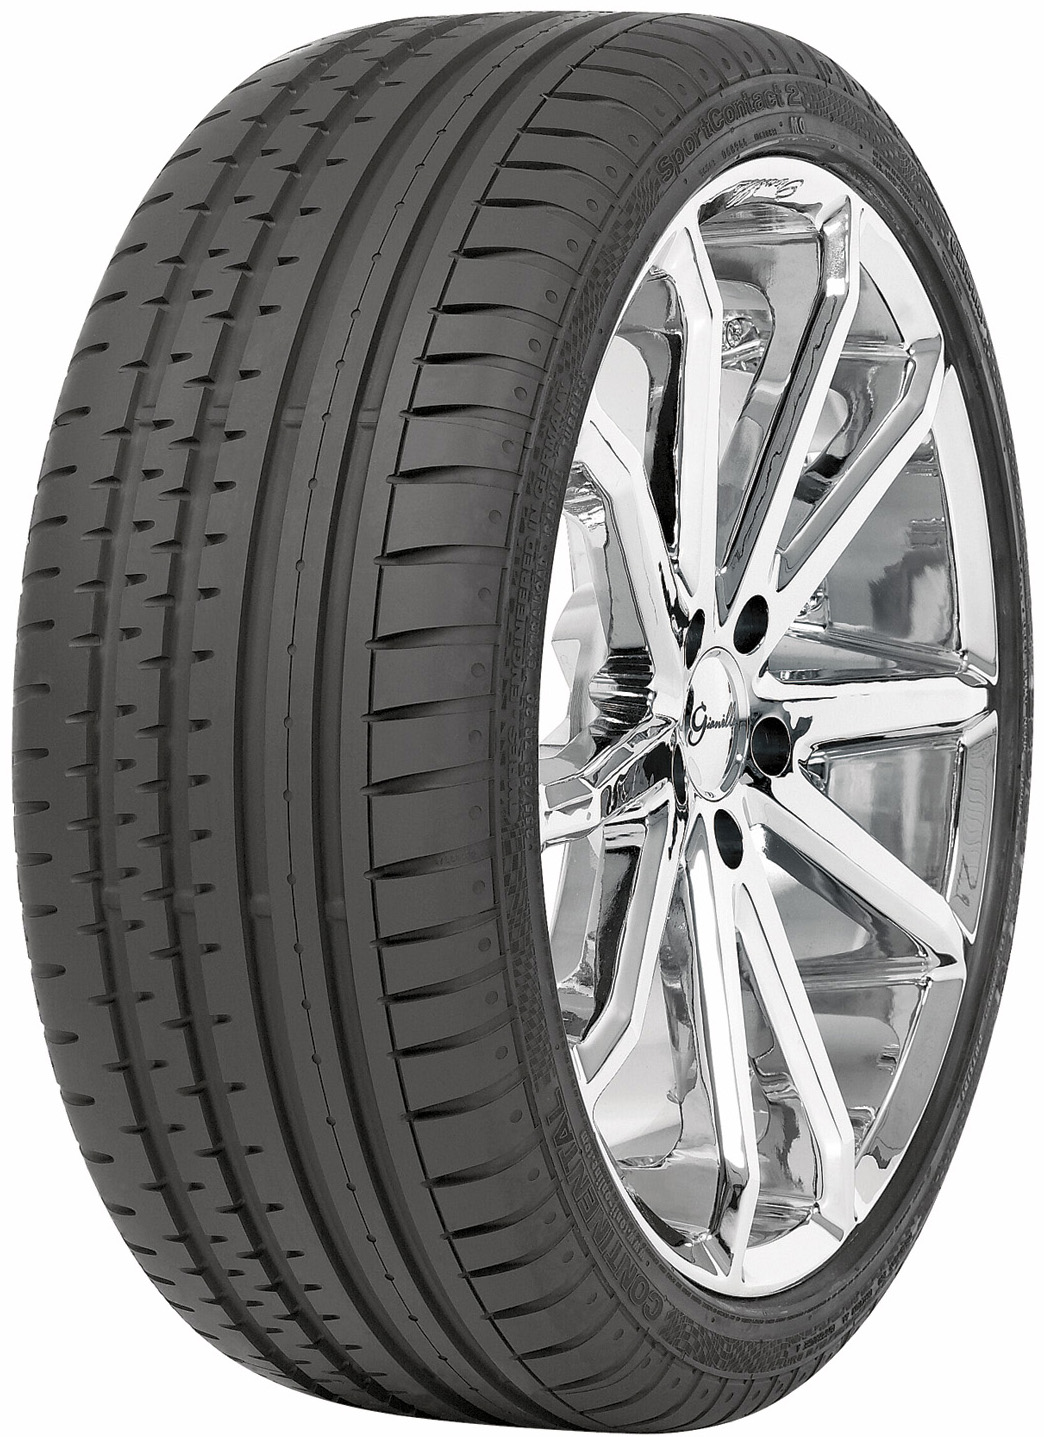 Anvelope auto CONTINENTAL SC-2 MO MERCEDES FP 255/40 R19 100Y